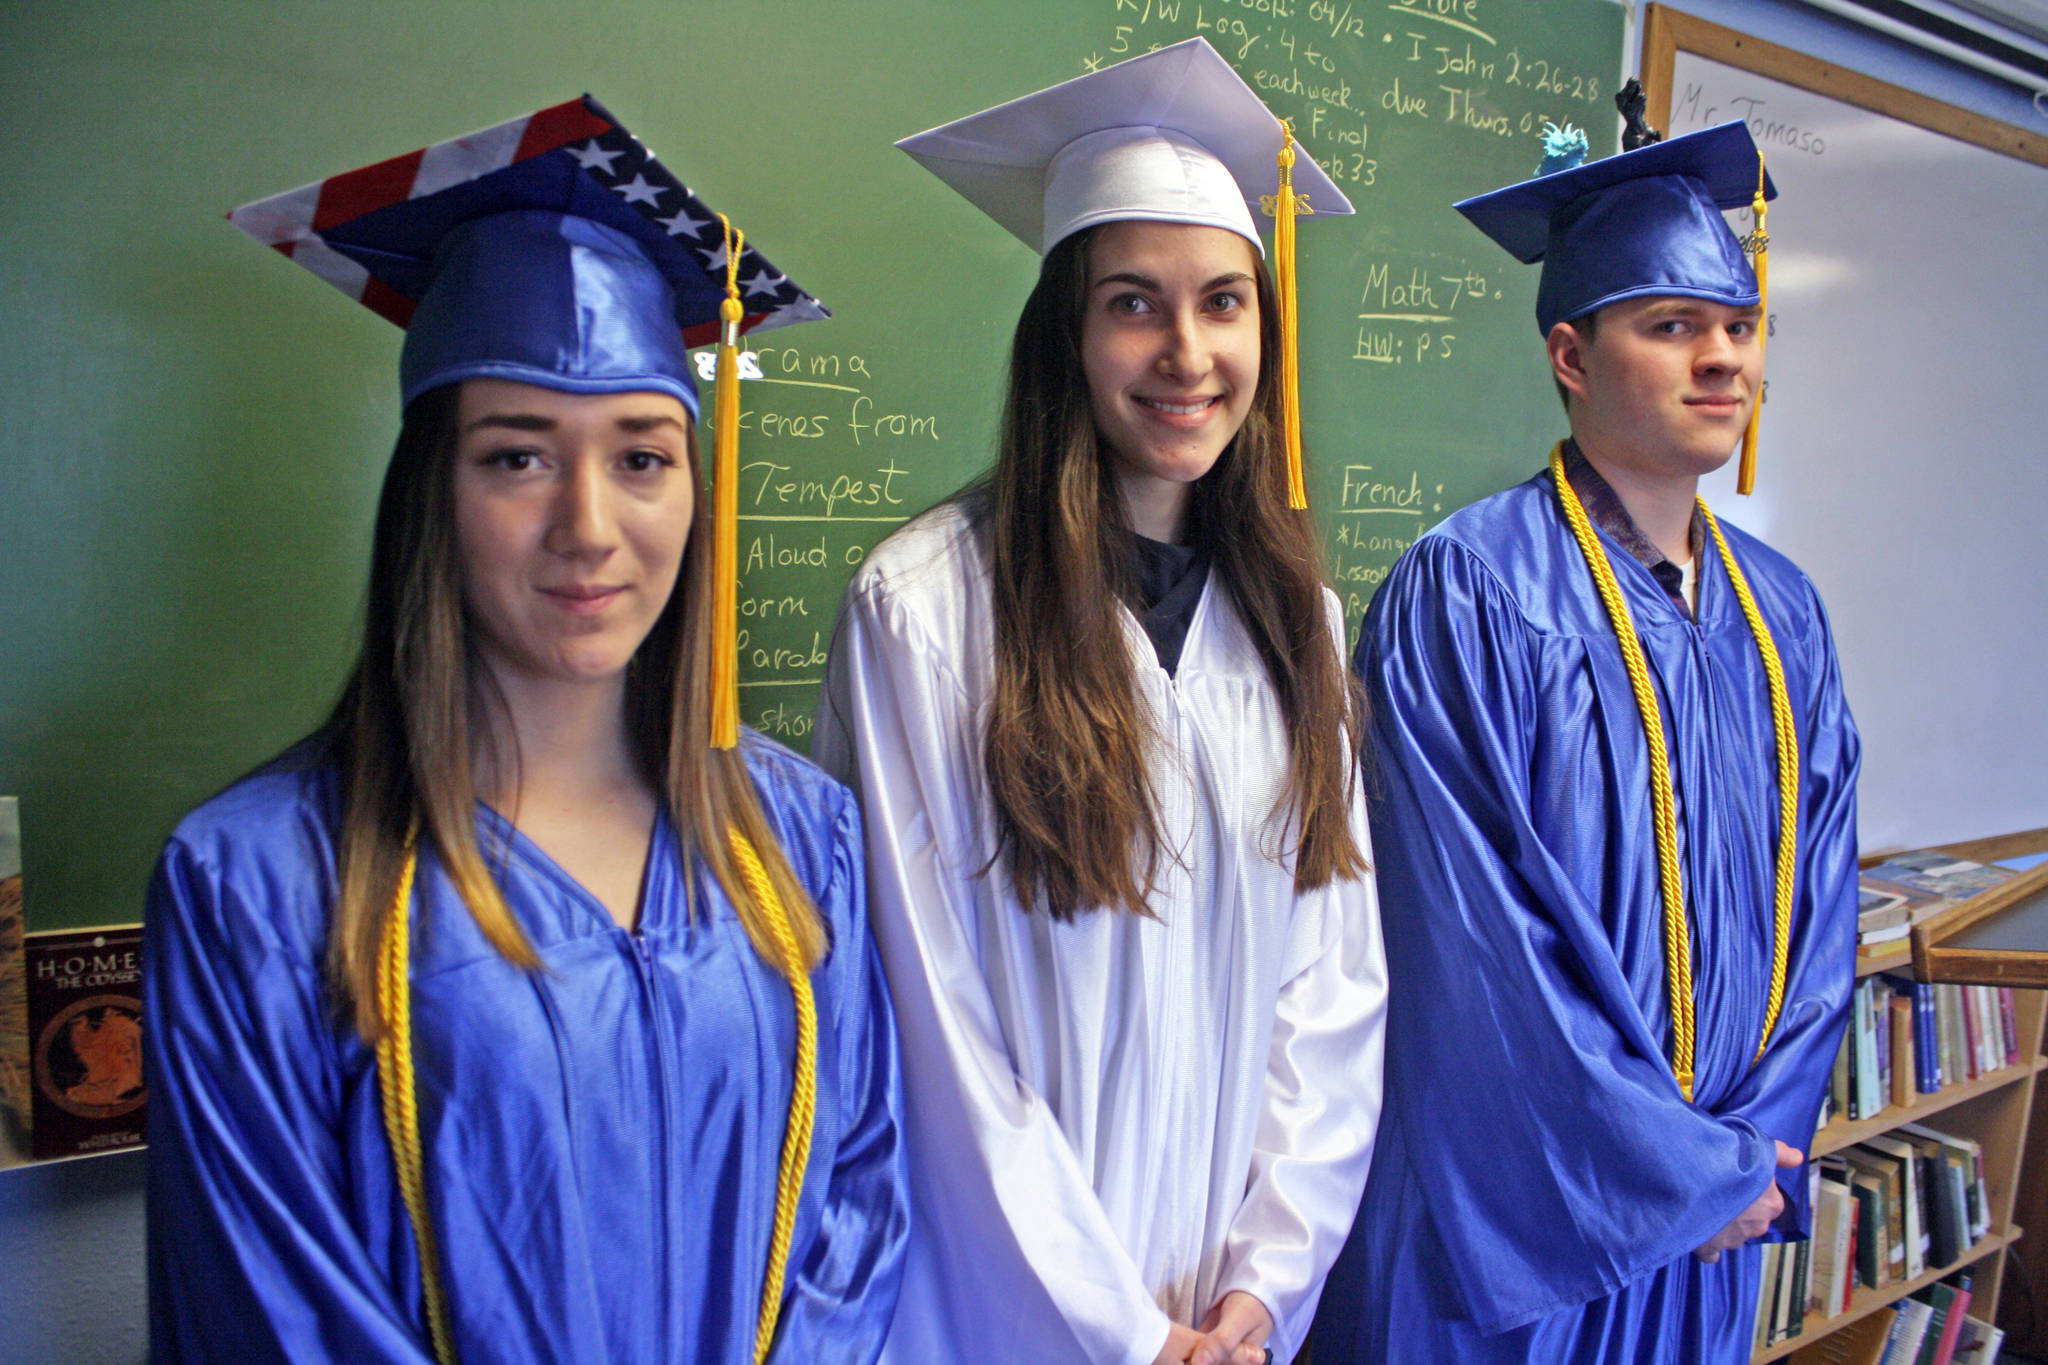 From left, Breona Michele DeLon, Chanelle Frances Usvat and Gabriel Nicholas Bignell prepare for their graduation at Cook Inlet Academy on Sunday, May 6. (Photo by Erin Thompson/Peninsula Clarion)